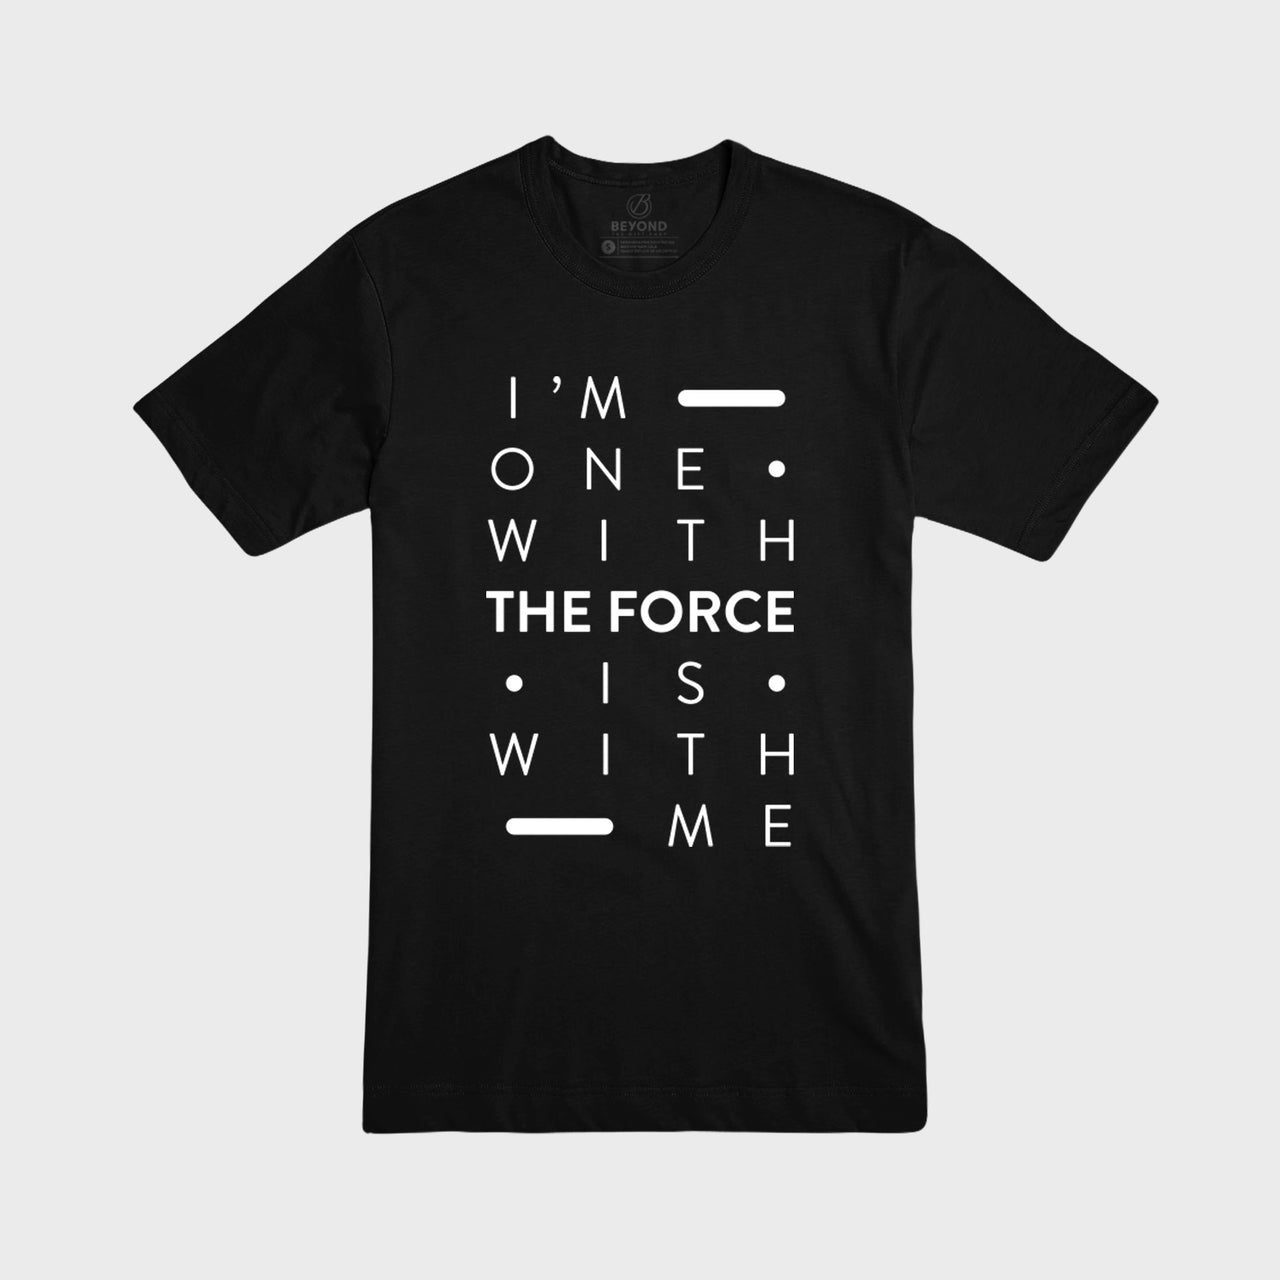 THE FORCE | Tee | Black